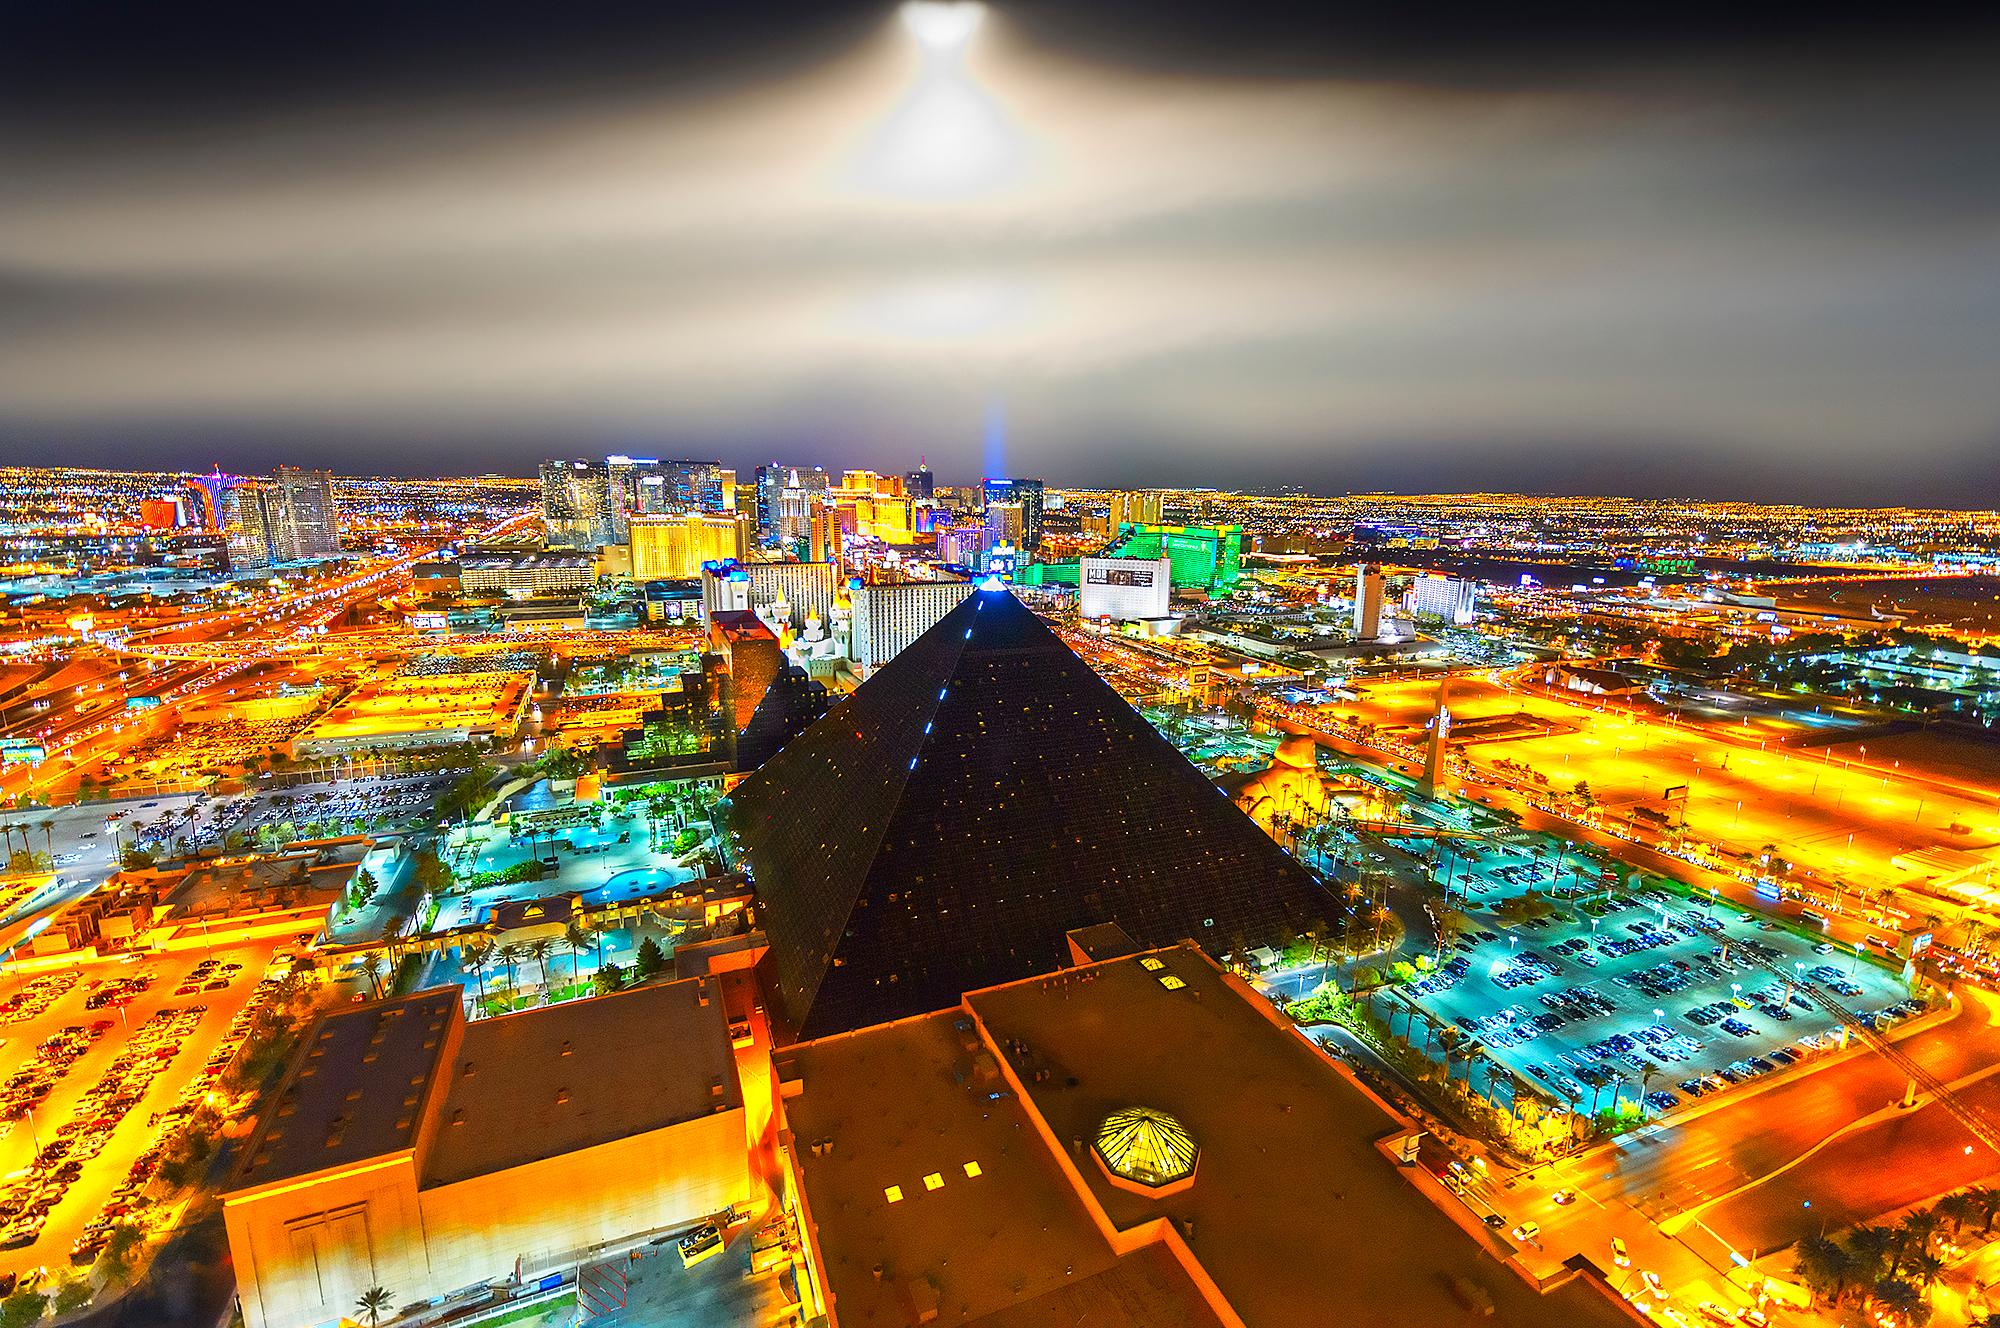 Mitchell Funk Color Photograph - Elevated View Of Las Vegas At Night With Moonlit Sky